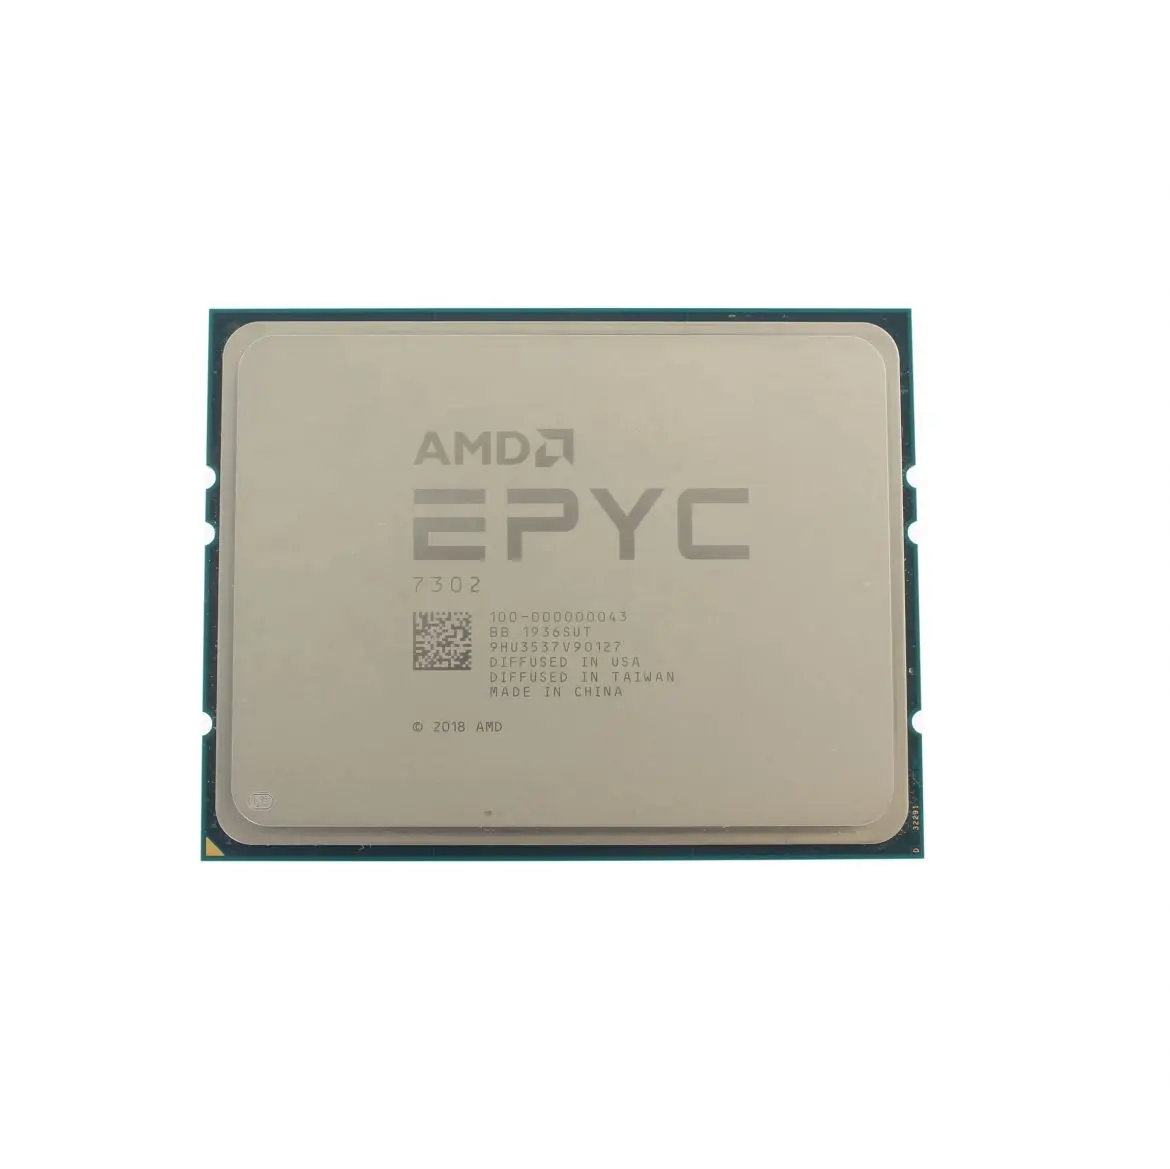 EPYC 7713 CPU 64-Core Server Processor Up to 3.675GHz SP3 256MB 225W Memory Up to 3200MHz For H12SSL-i/H12DSI Accessories CPU